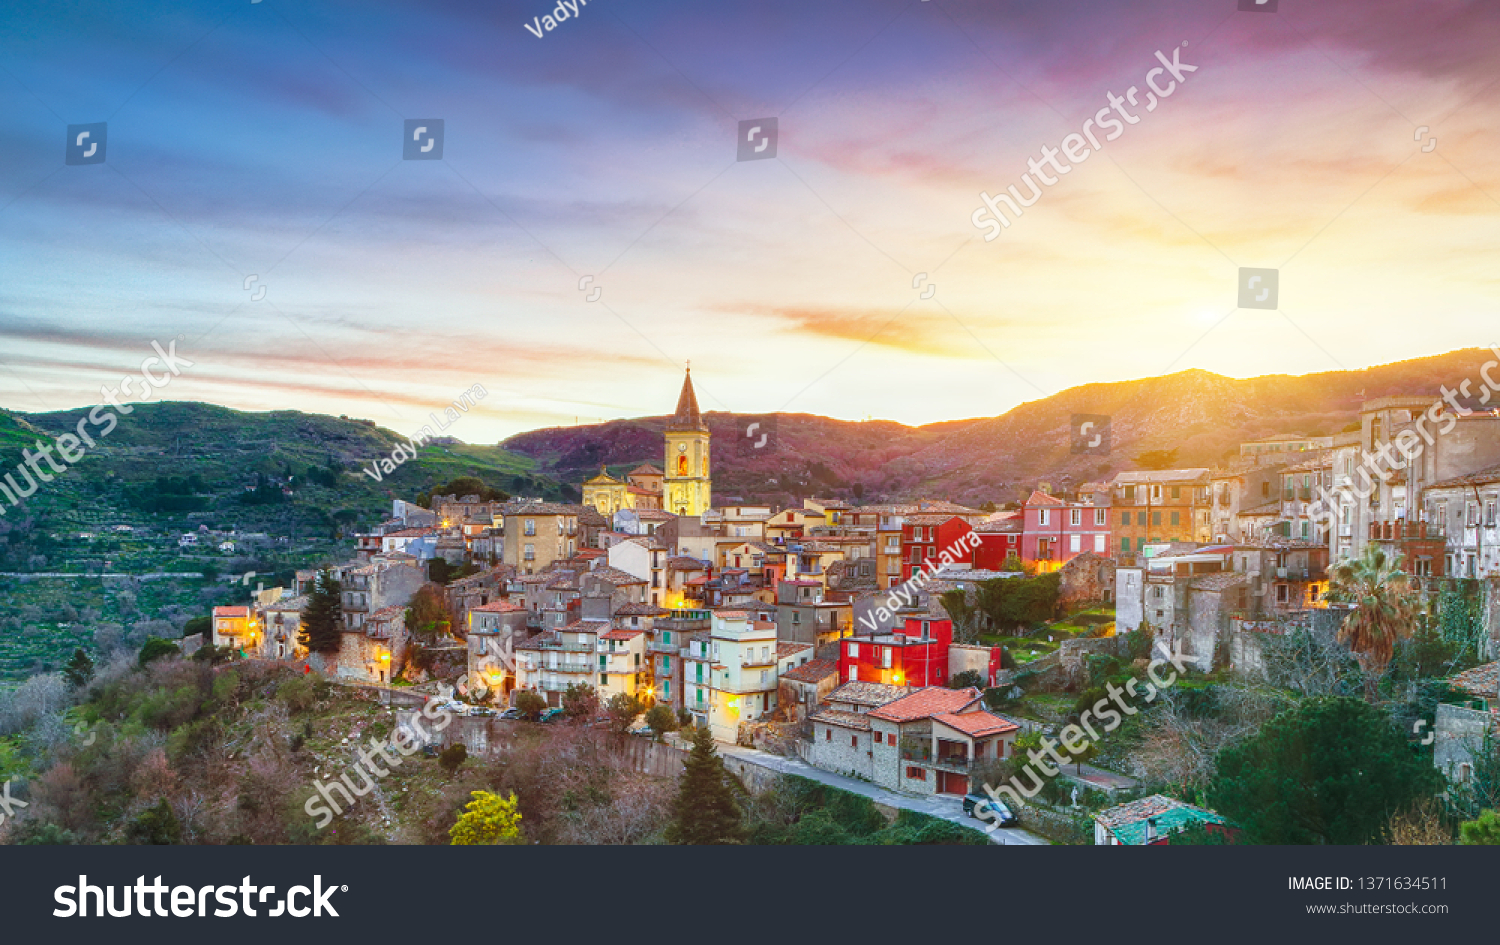 Panorama of the belltower and the village in the valley at early sunrise. Mountain village Novara di Sicilia, Sicily, Italy #1371634511